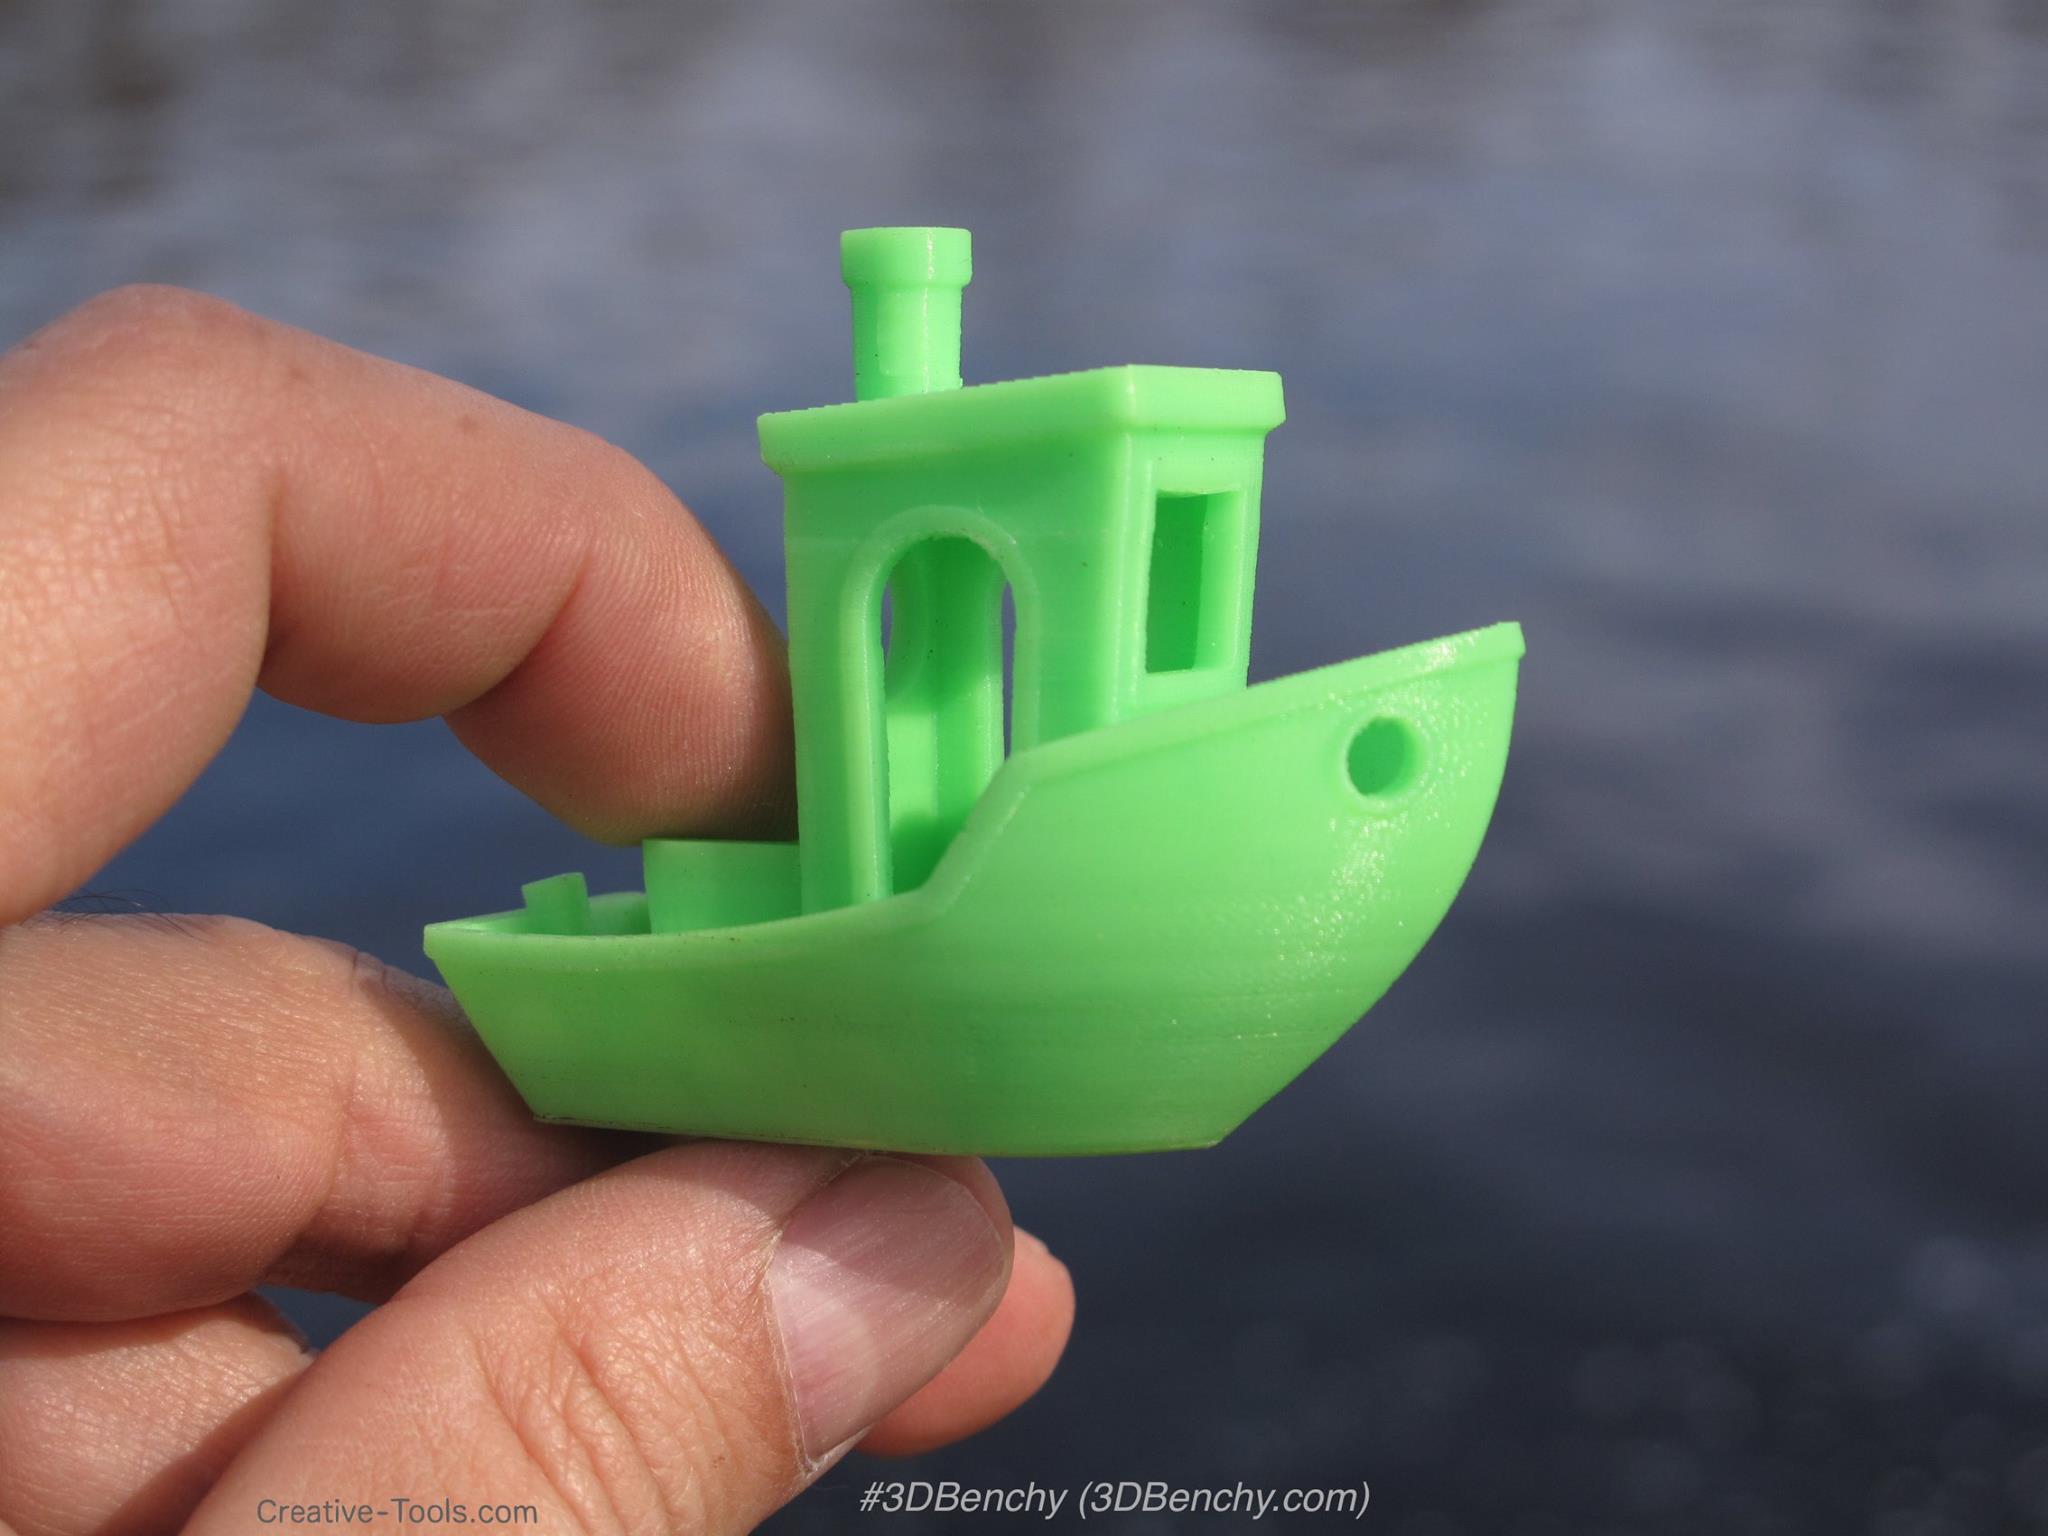 Creative Tools Release #3DBenchy - The Coolest 3D Printer ...